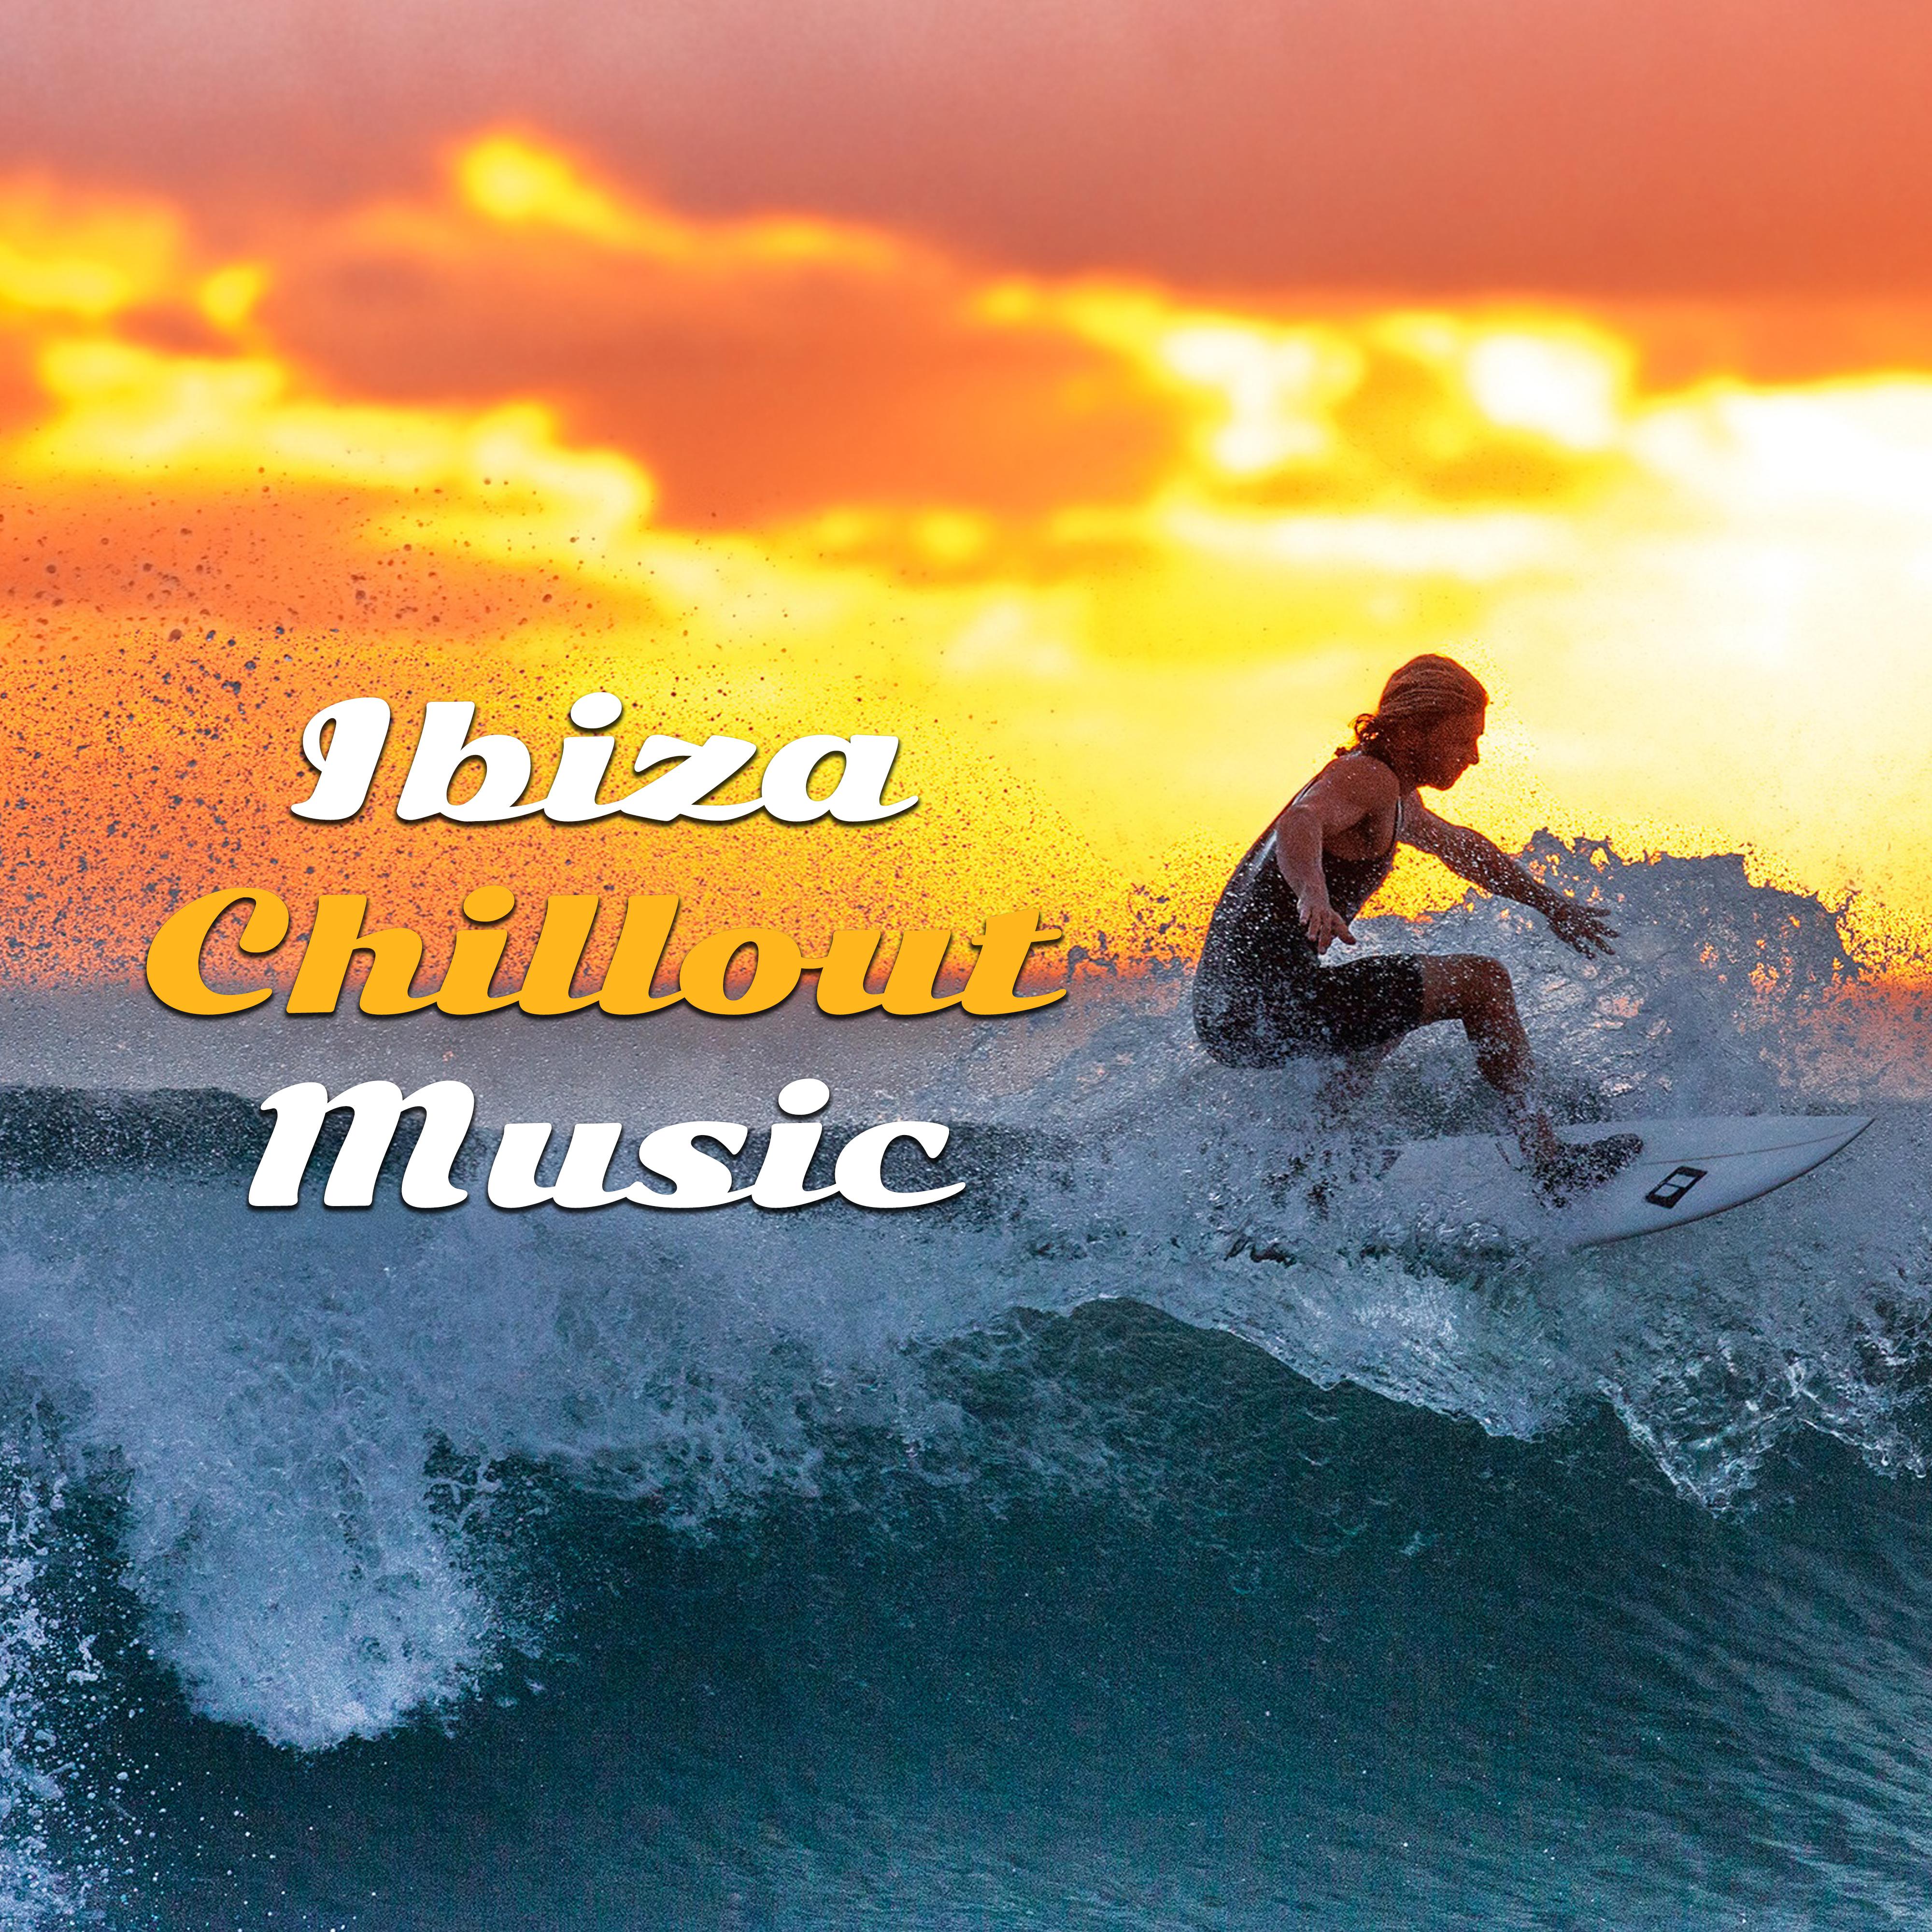 Ibiza Chillout Music  Calming Sounds to Relax, Ibiza Rest, Peaceful Chill Out Music, Easy Listening